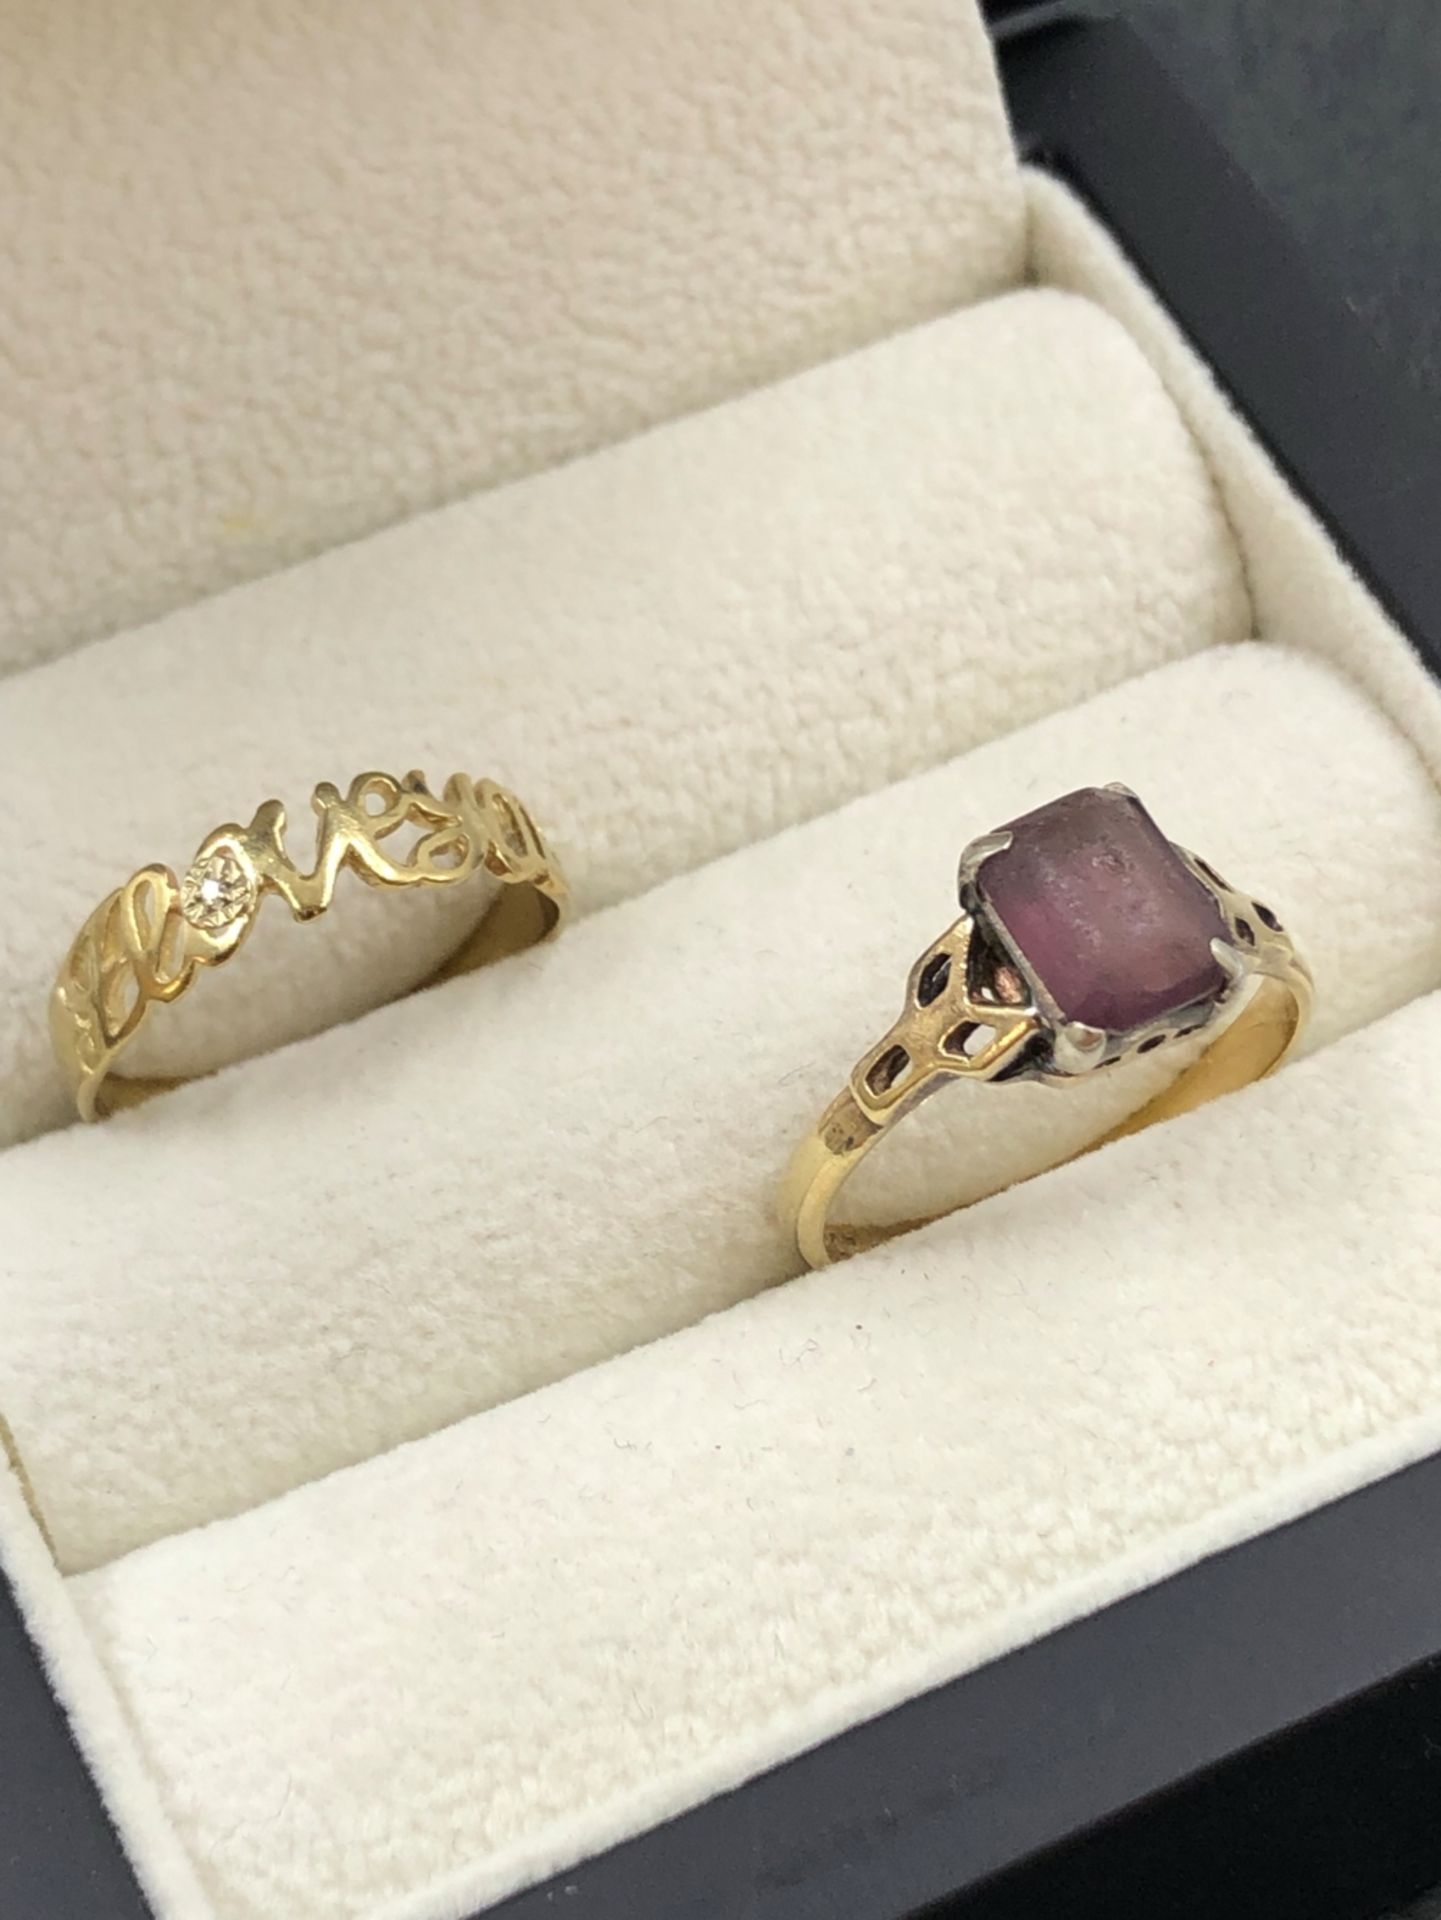 A VINTAGE 9ct GOLD AND SILVER STONE SET DRESS RING SIZE N 1/2 AND A HALLMARKED 9ct GOLD I LOVE YOU - Image 2 of 2